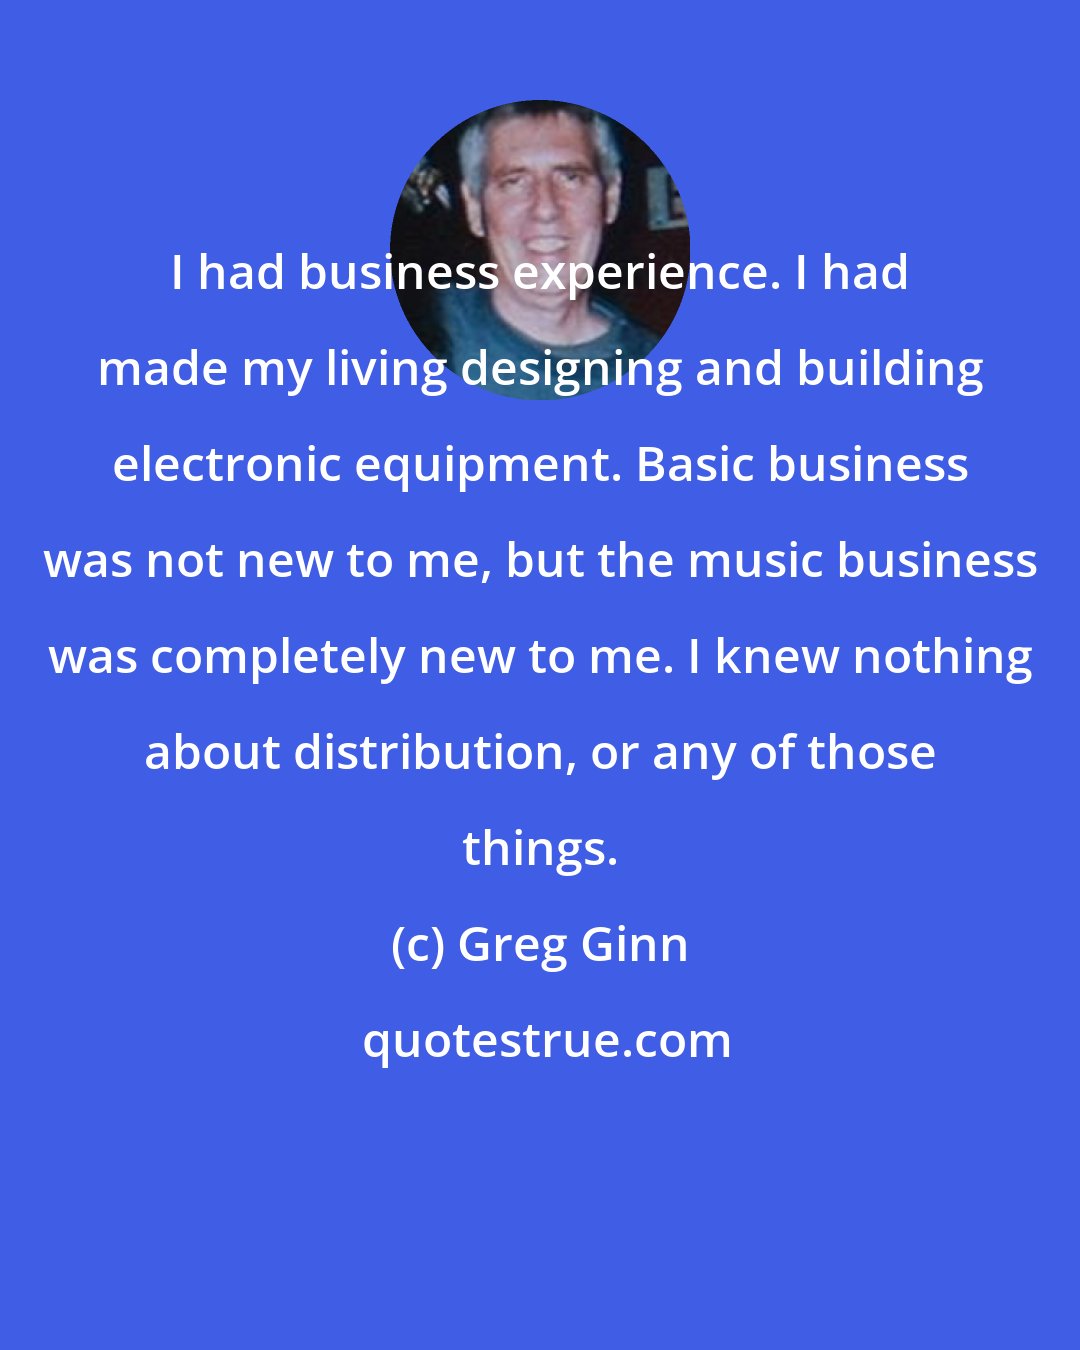 Greg Ginn: I had business experience. I had made my living designing and building electronic equipment. Basic business was not new to me, but the music business was completely new to me. I knew nothing about distribution, or any of those things.